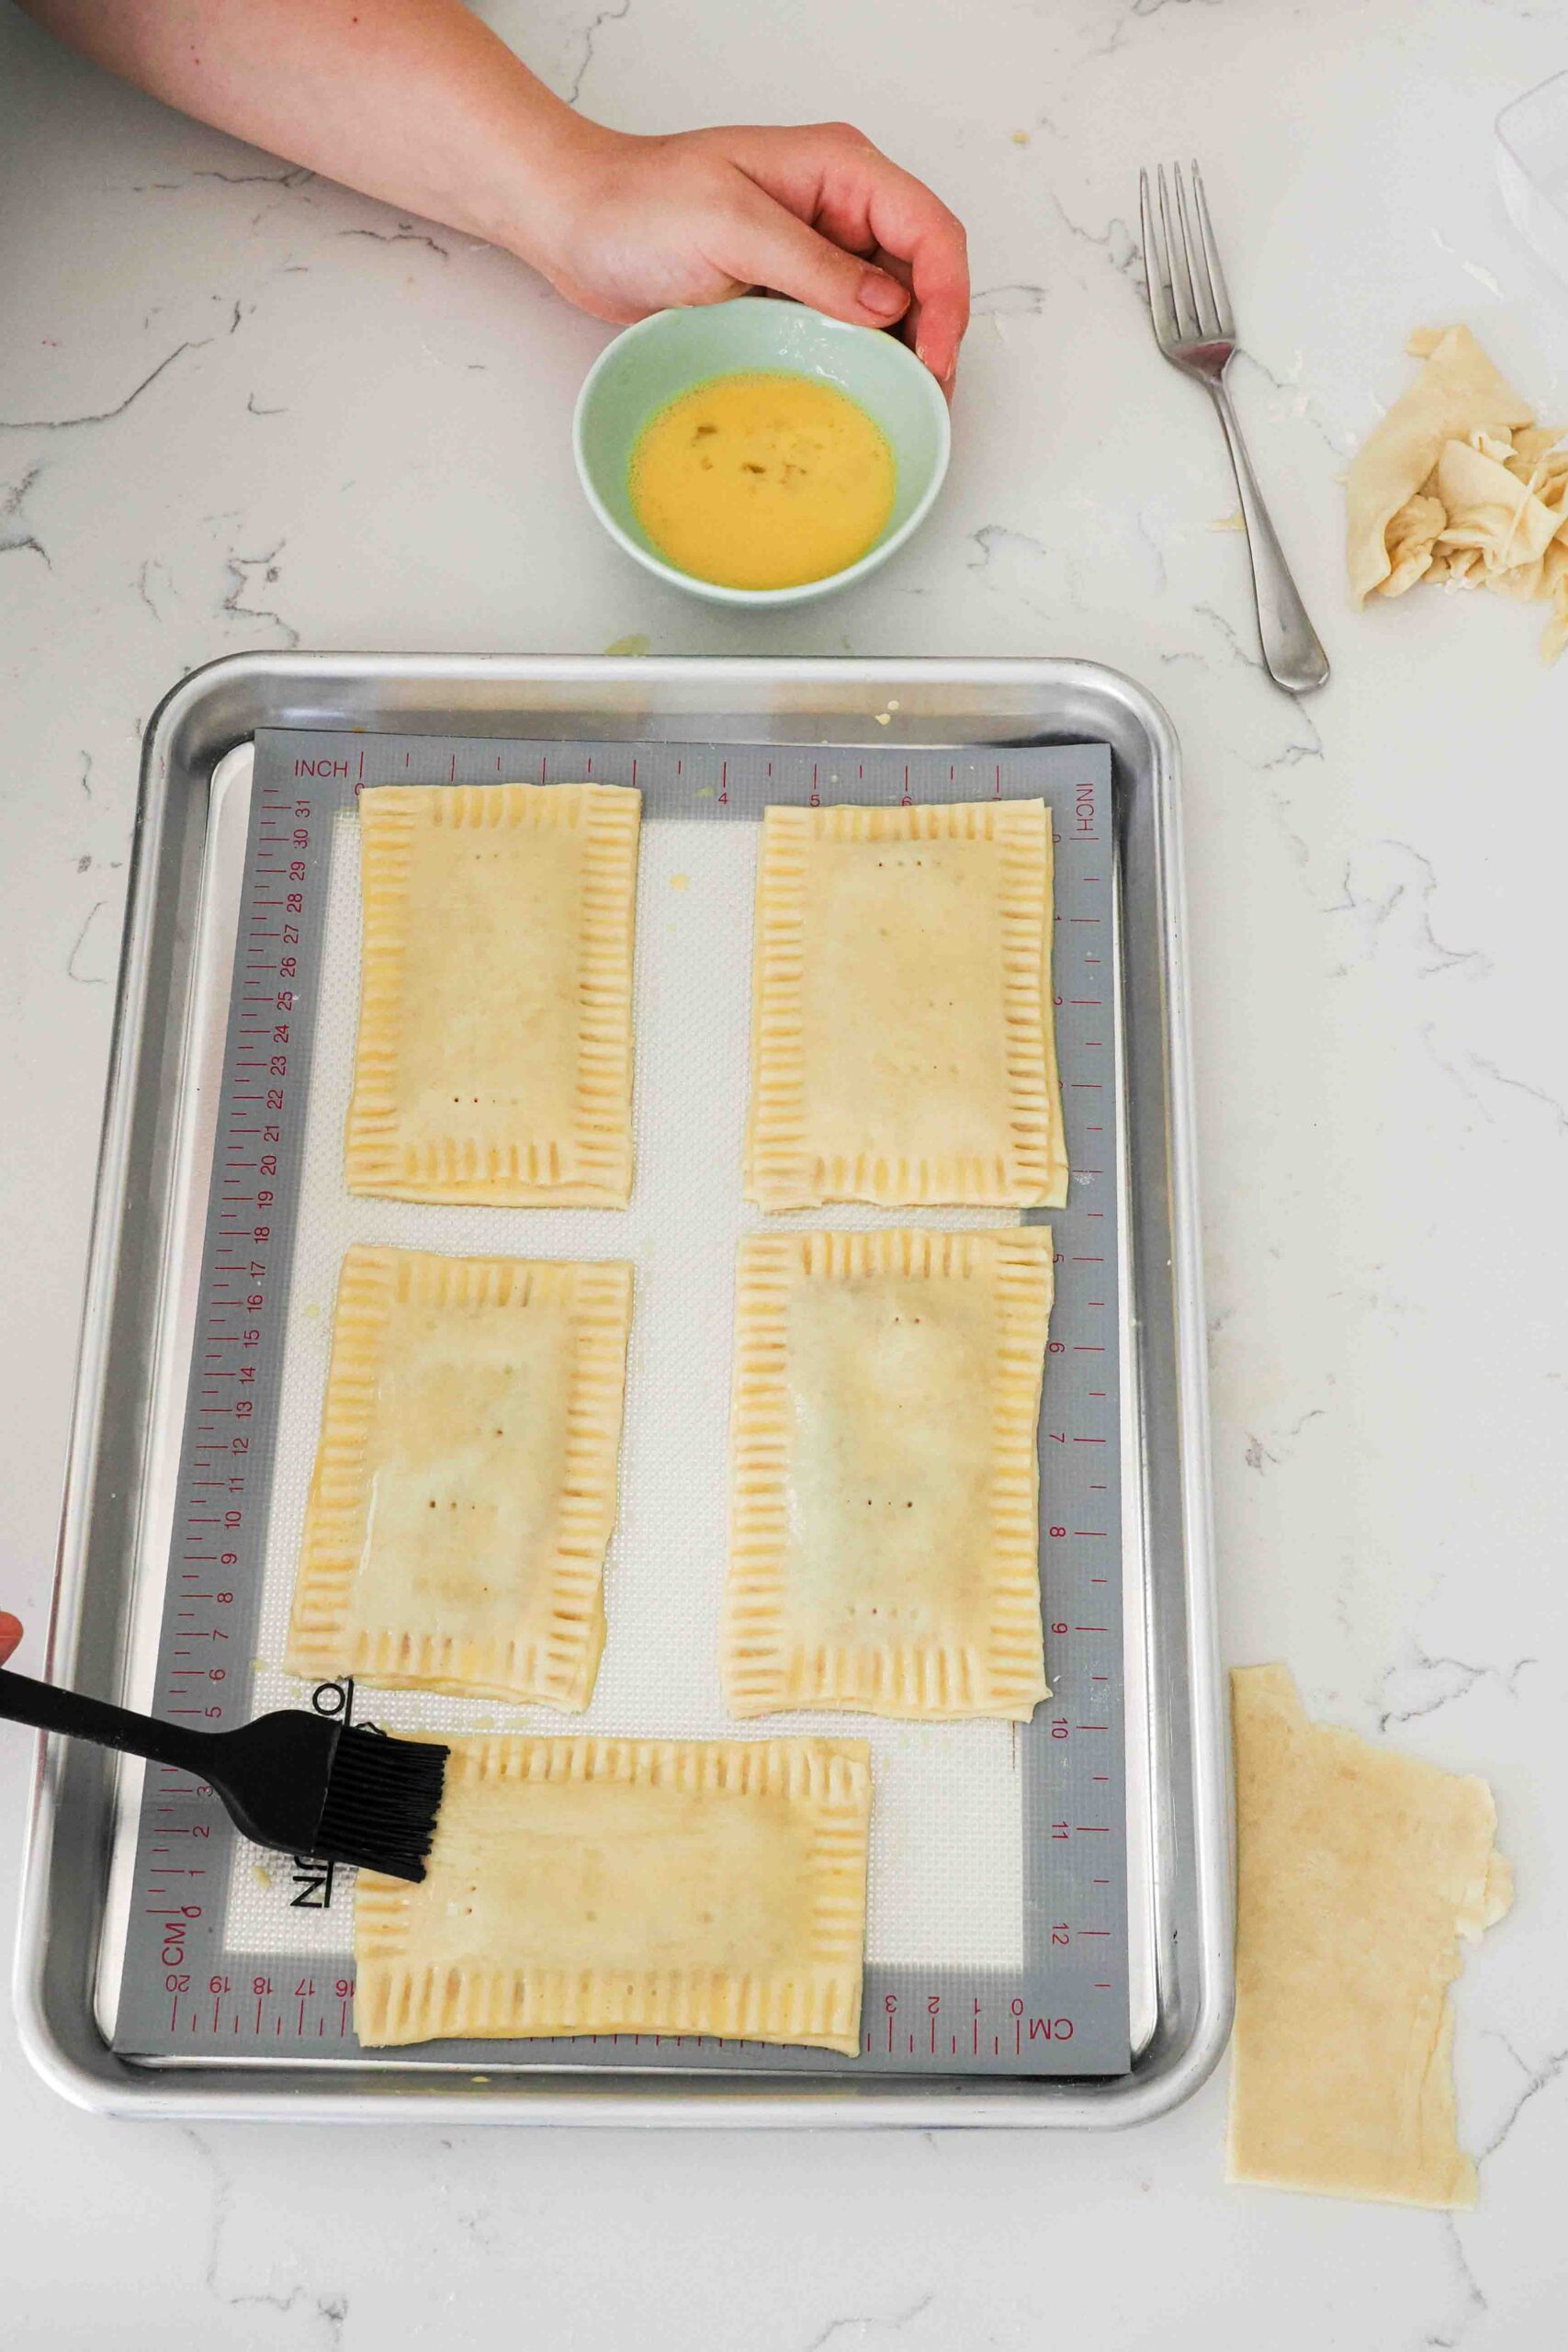 Egg wash is brushed onto homemade pop tarts with a pastry brush.